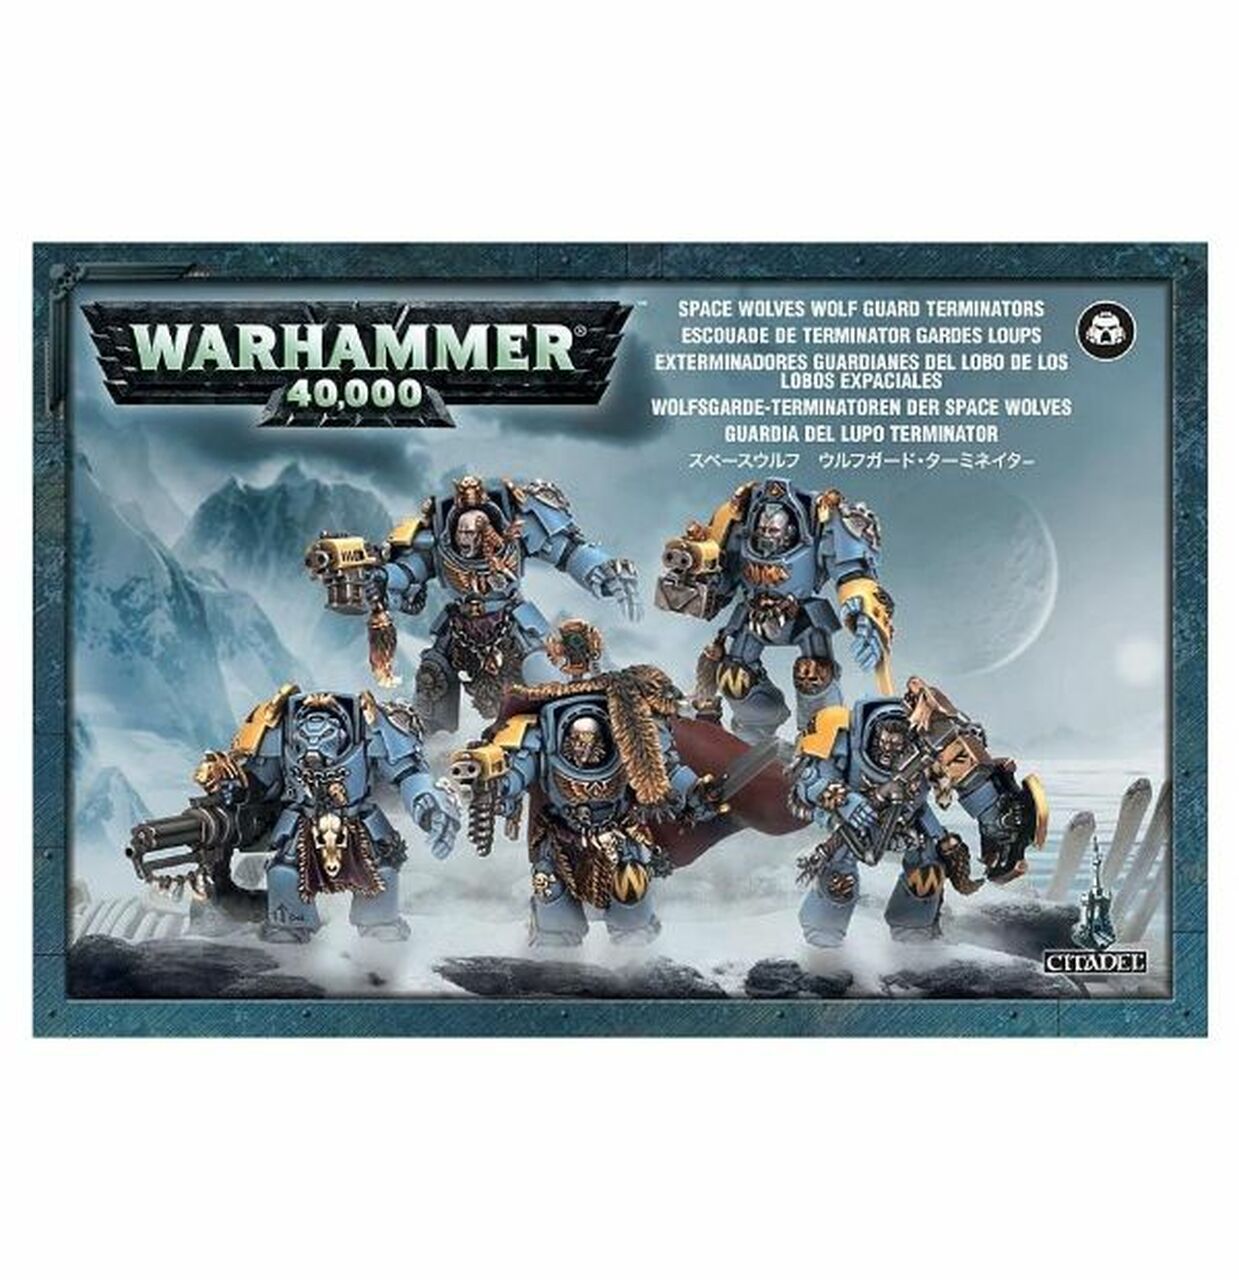 Warhammer: 40,000 - Space Wolves: Wolf Guard Terminators